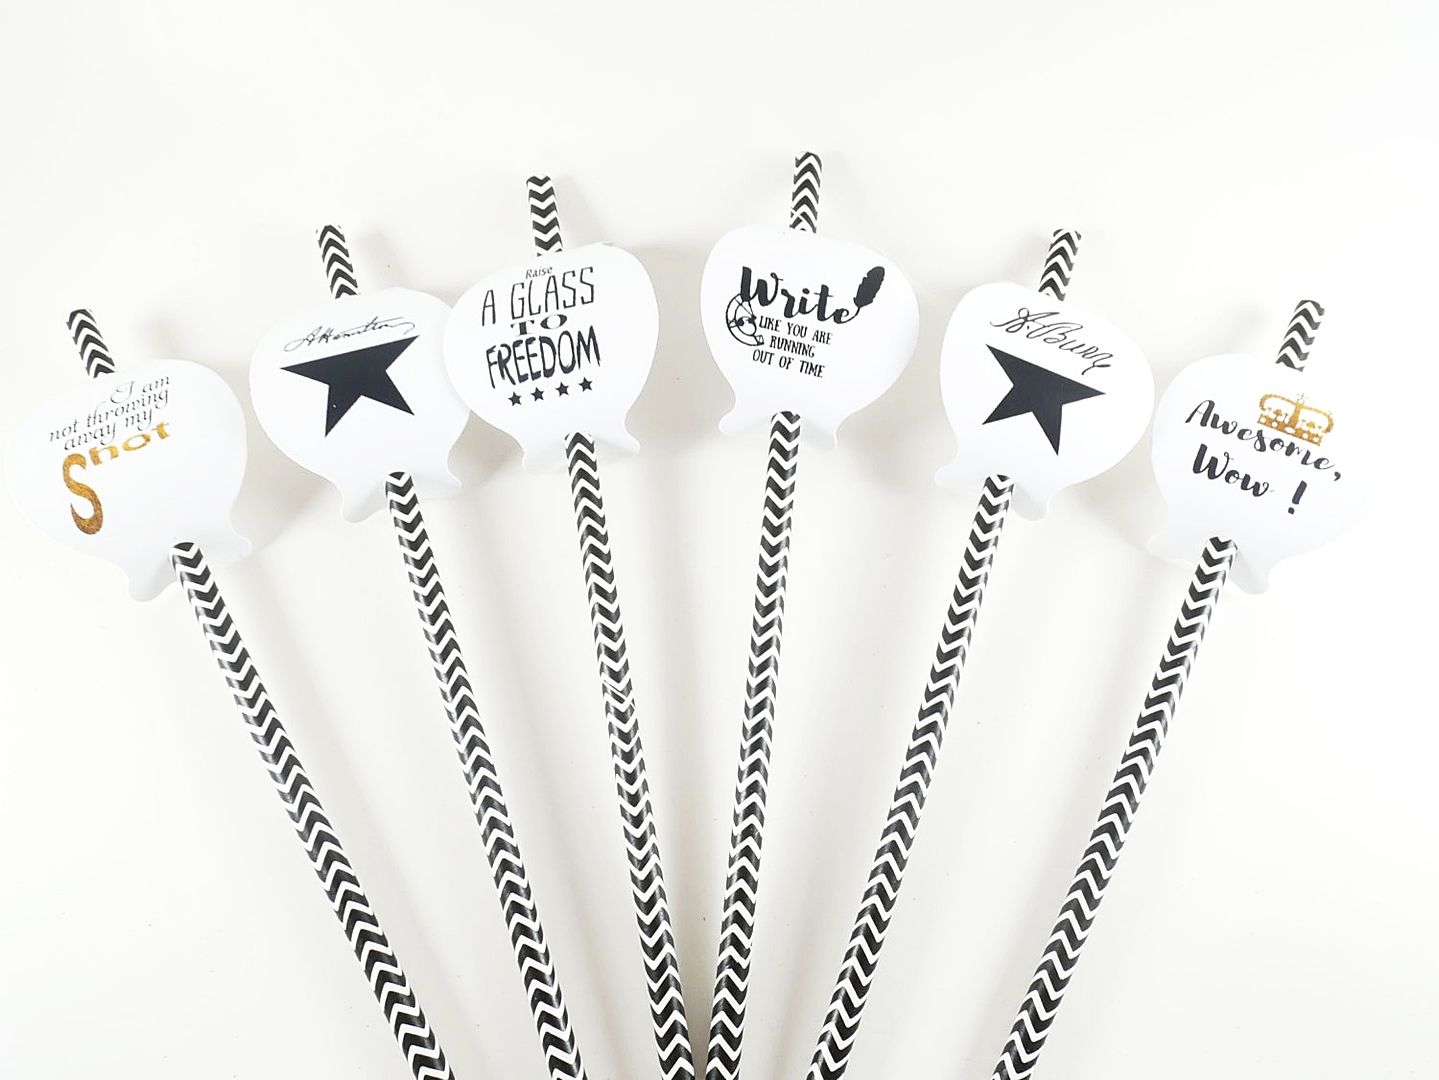 Hamilton party ideas: paper straws with Hamilton quotes from Hello Party Crafts